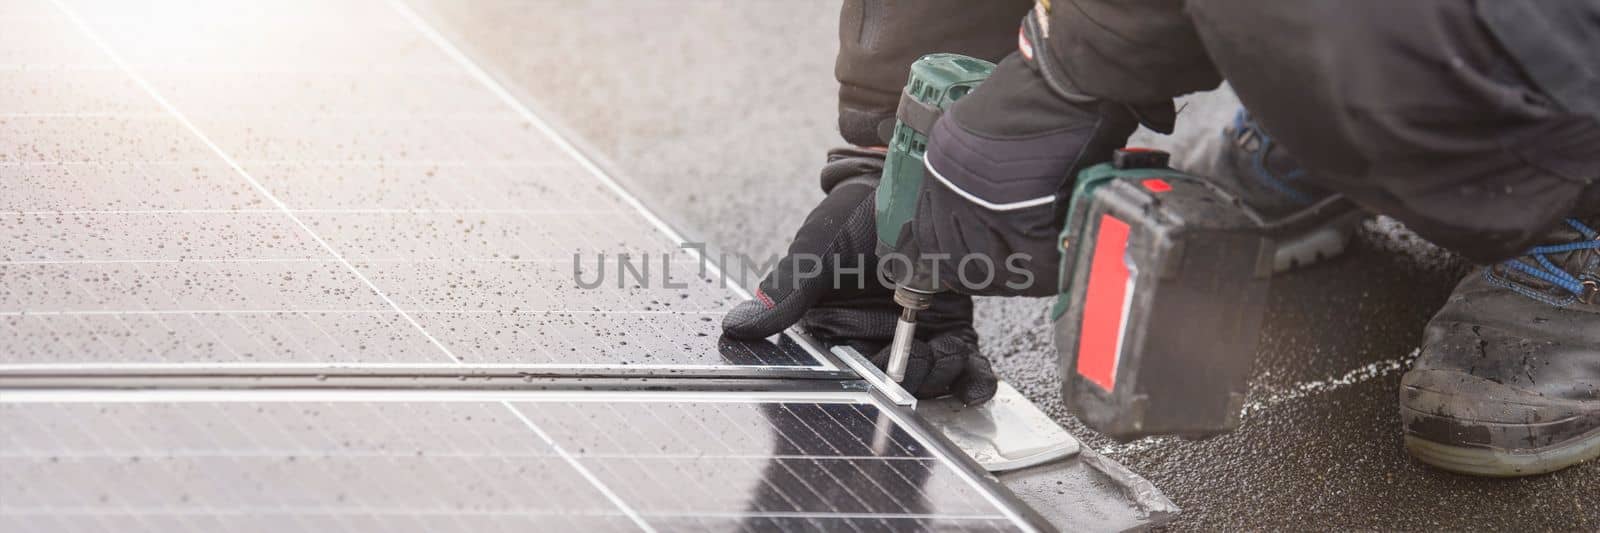 Renewable energy. Green energy concept. The process of installing solar panels. The master tightens the mounting of the solar panel module. by SERSOL